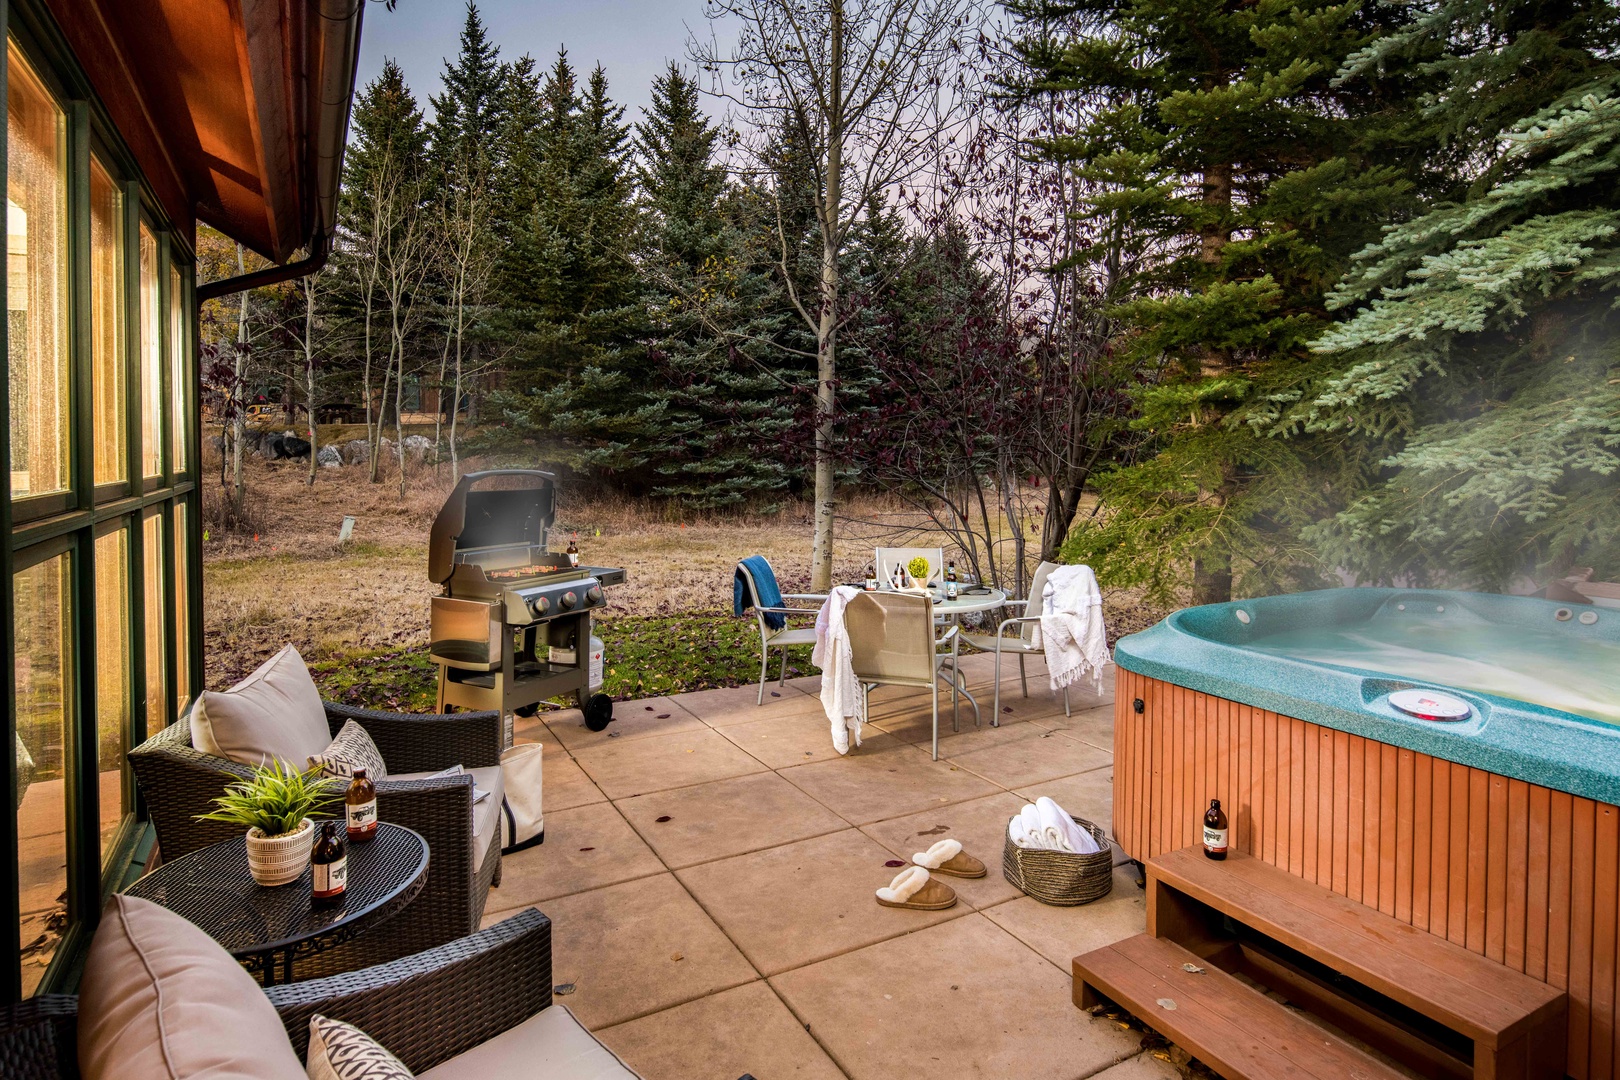 Back patio with private hot tub